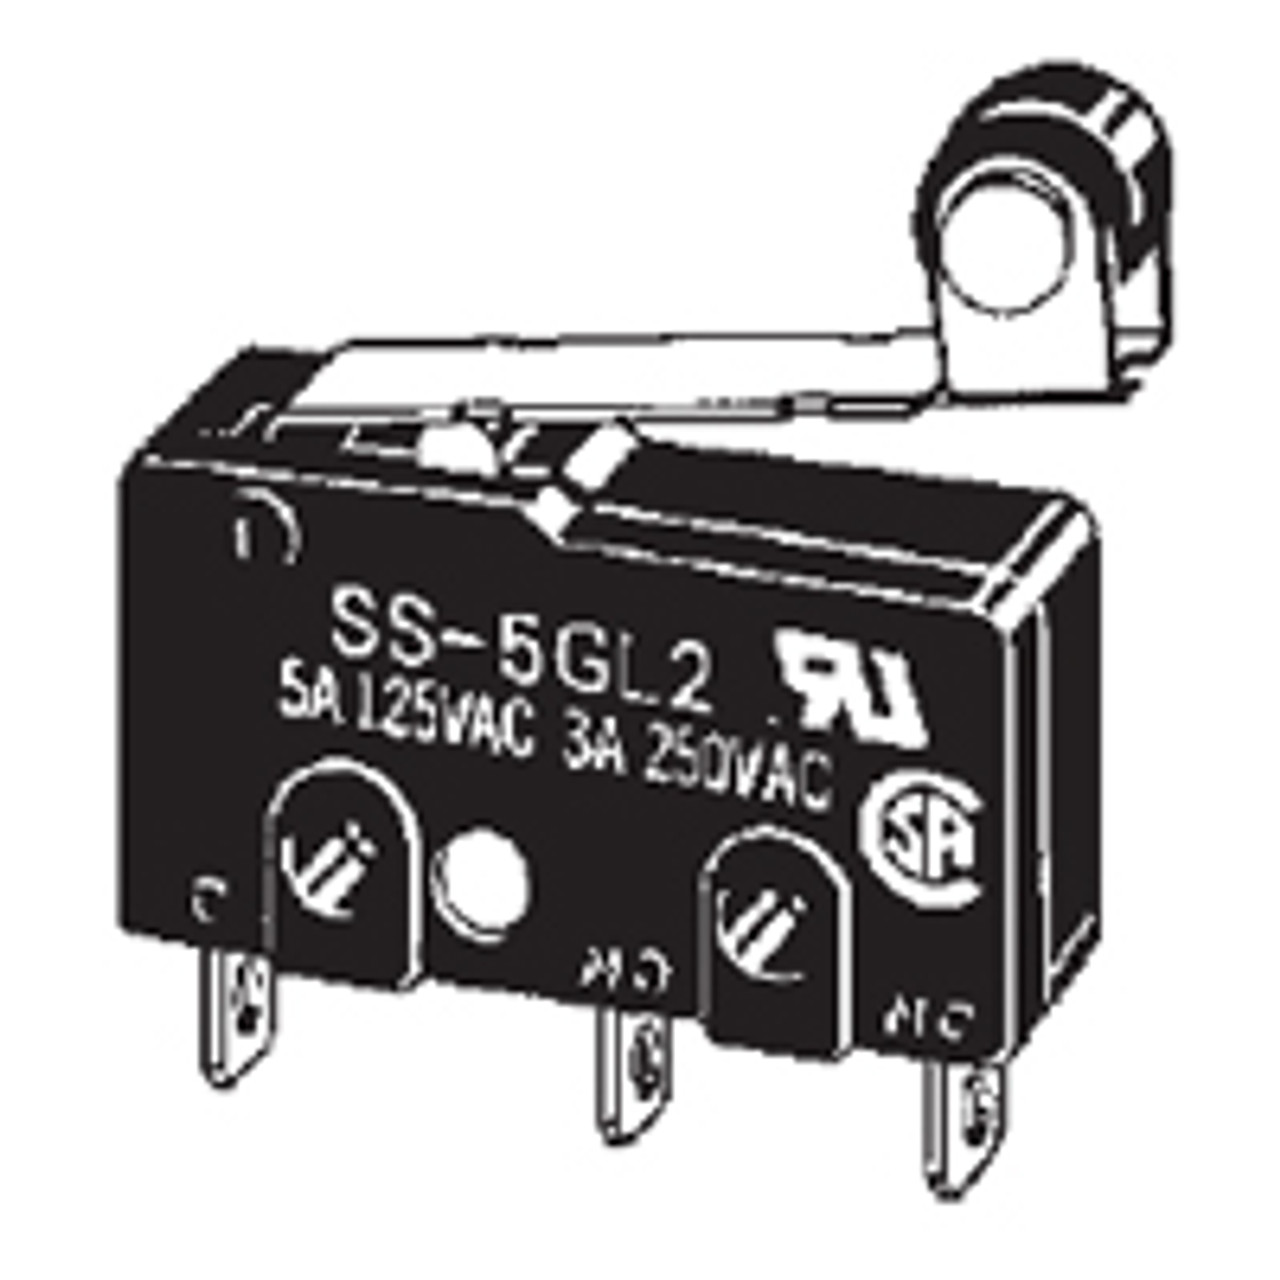 Omron SS-5GL2-FD2 Snap-Action Switches